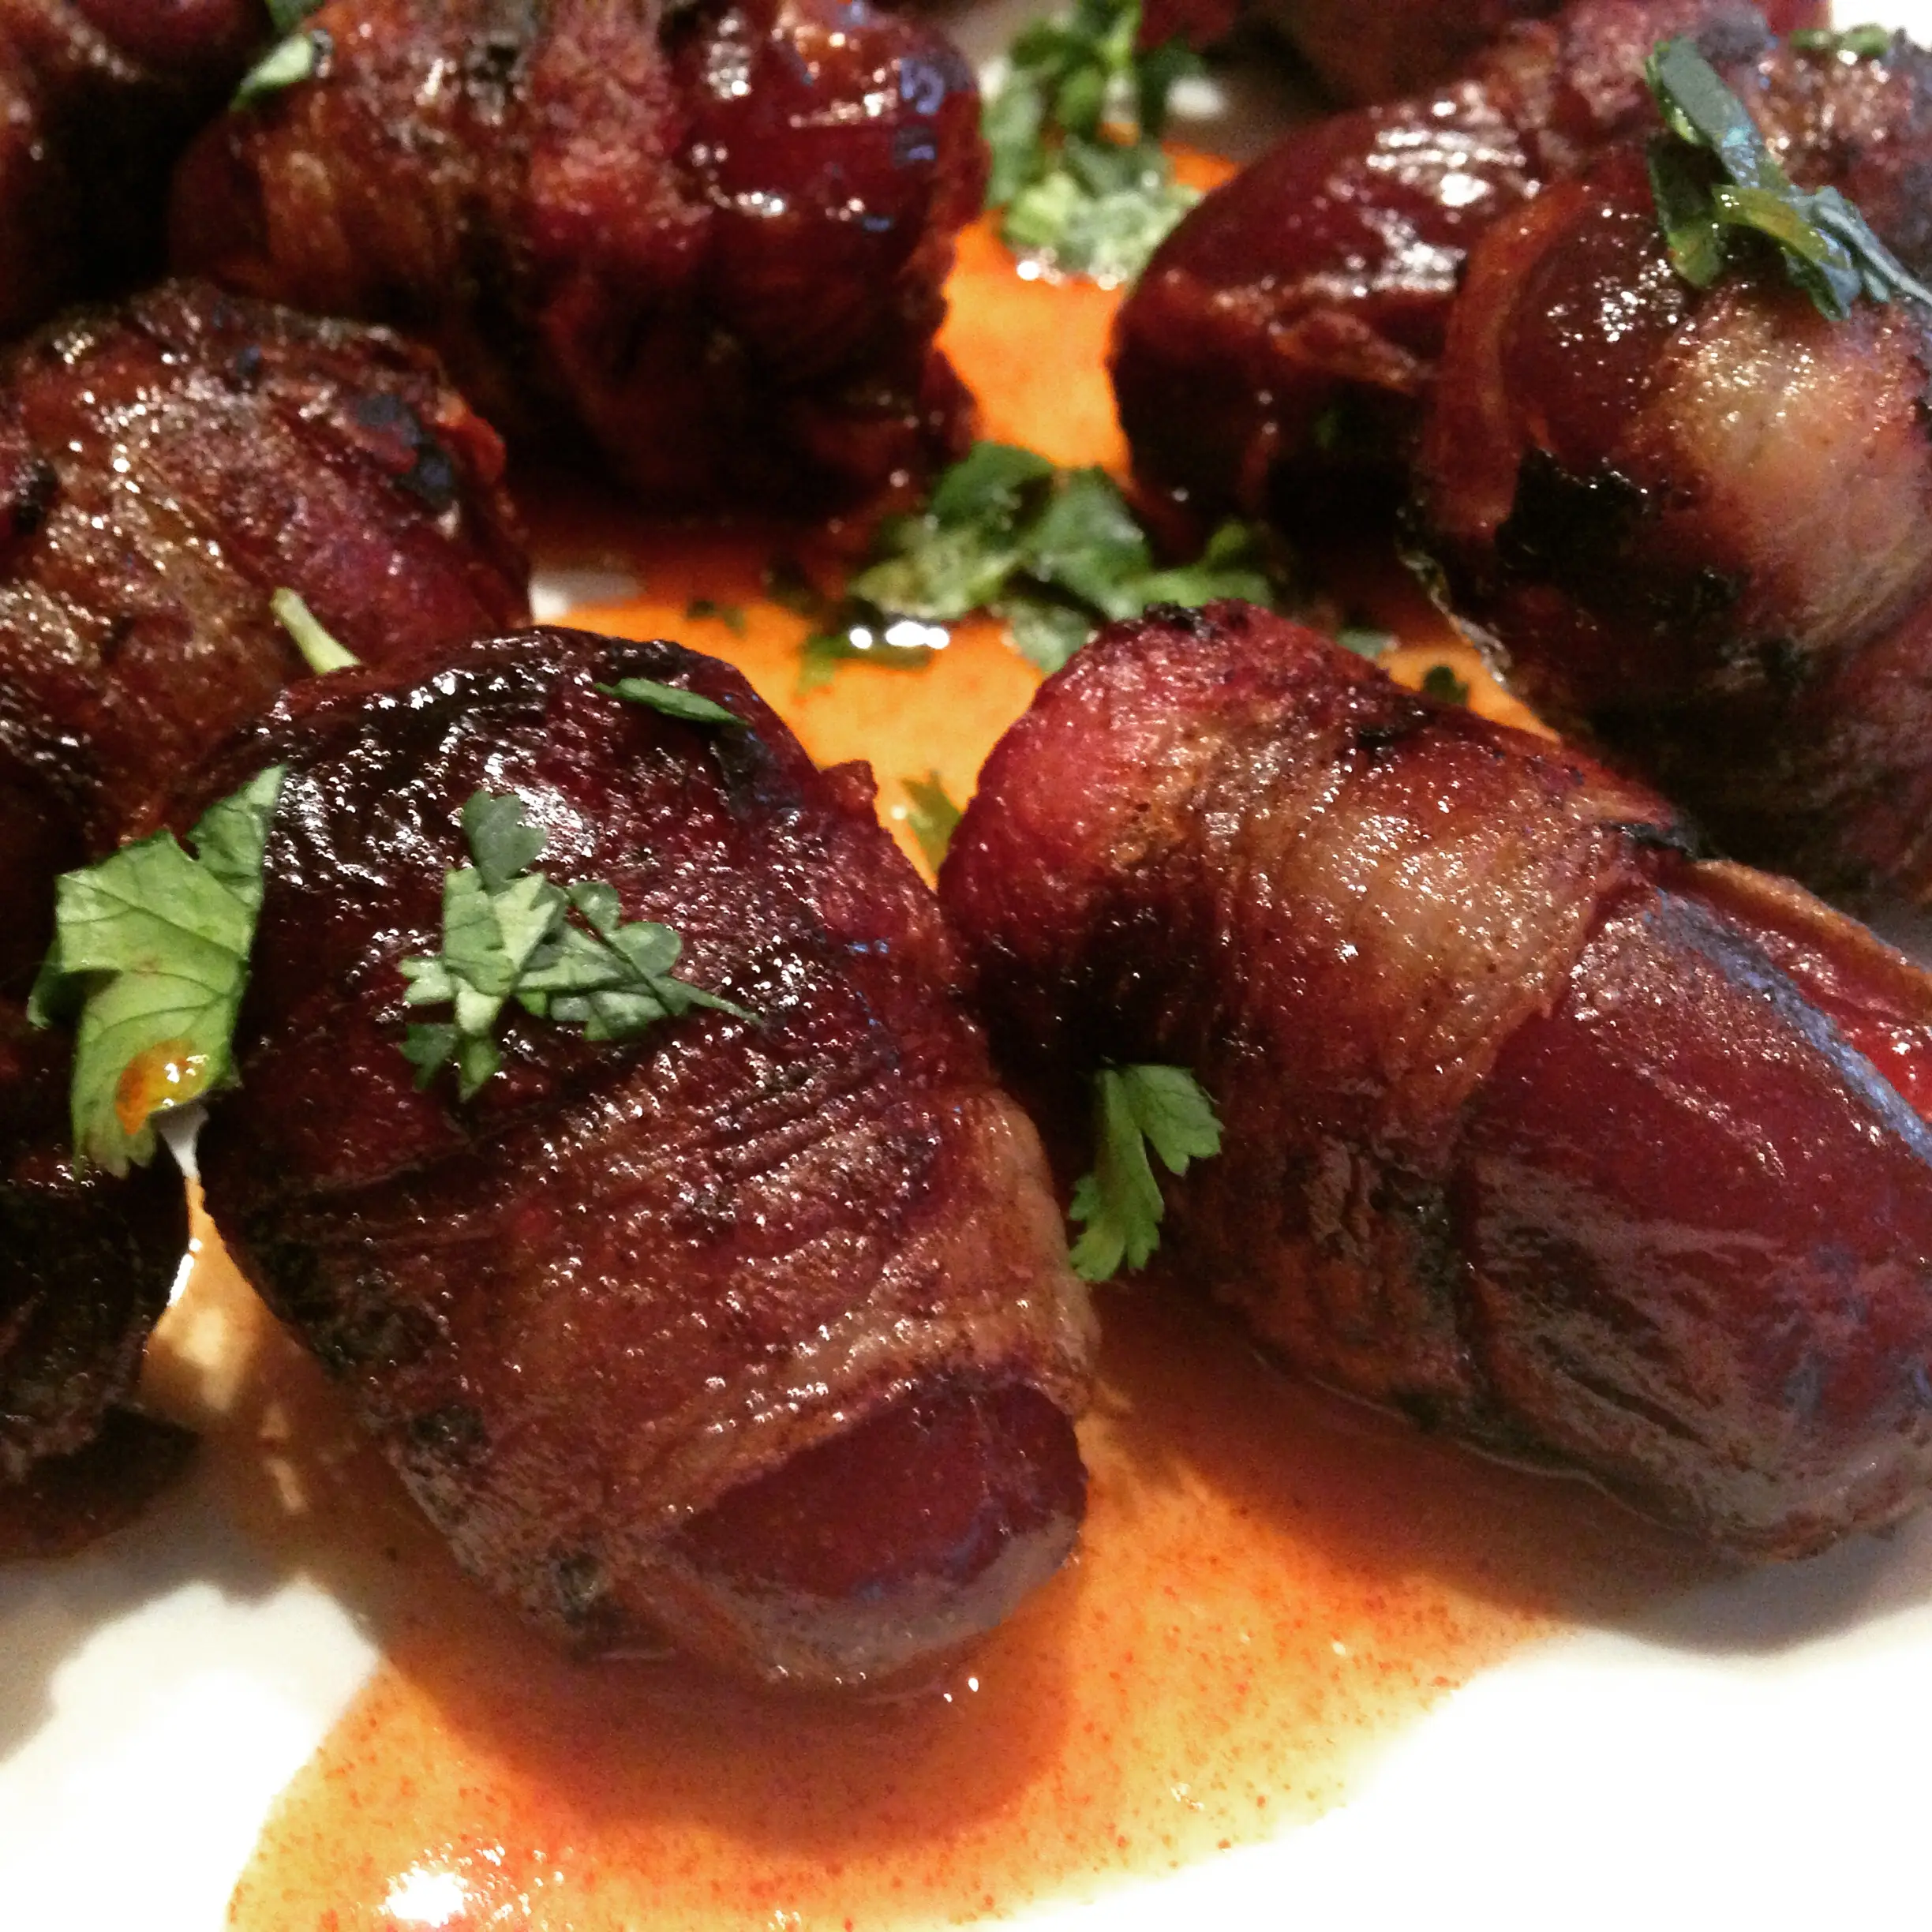 smoked bacon wrapped dates - How many calories are in a bacon wrapped date